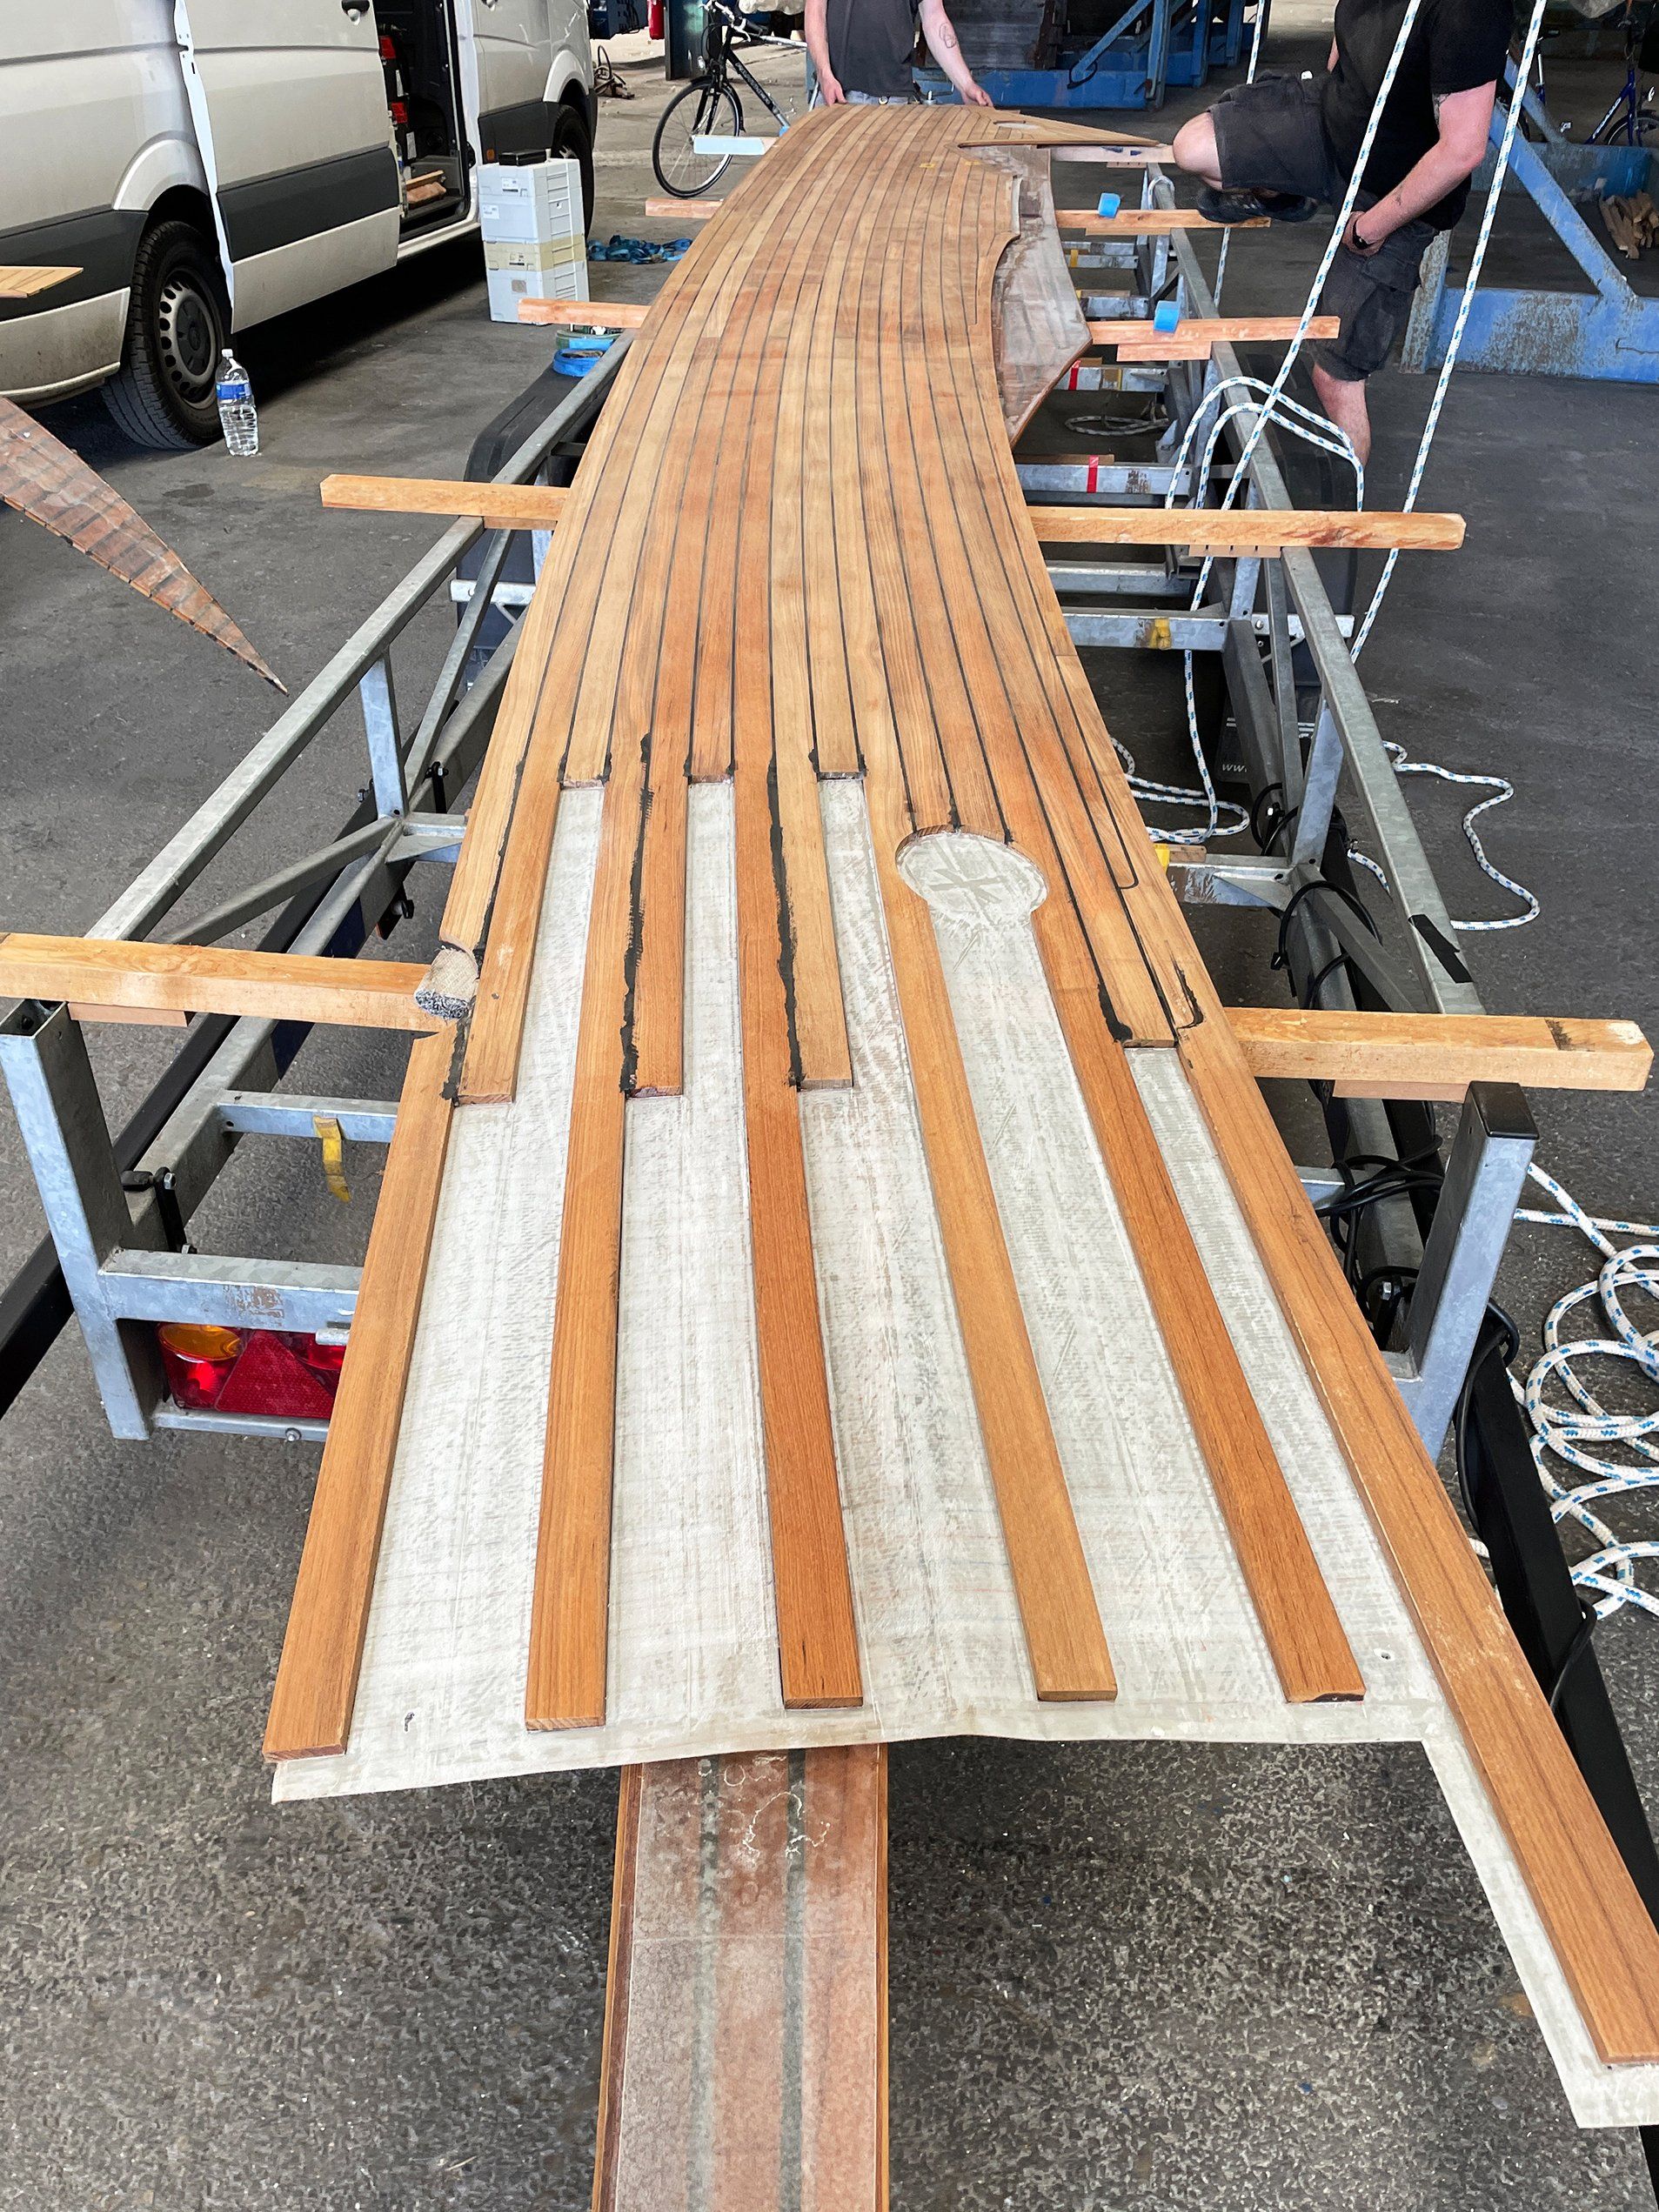 Transport of a teak deck deck panel, the layer of epoxy resin is visible as preparation for teak deck installation on a Futuna 57 sailing yacht by Mobilerbootsbau boat builder company